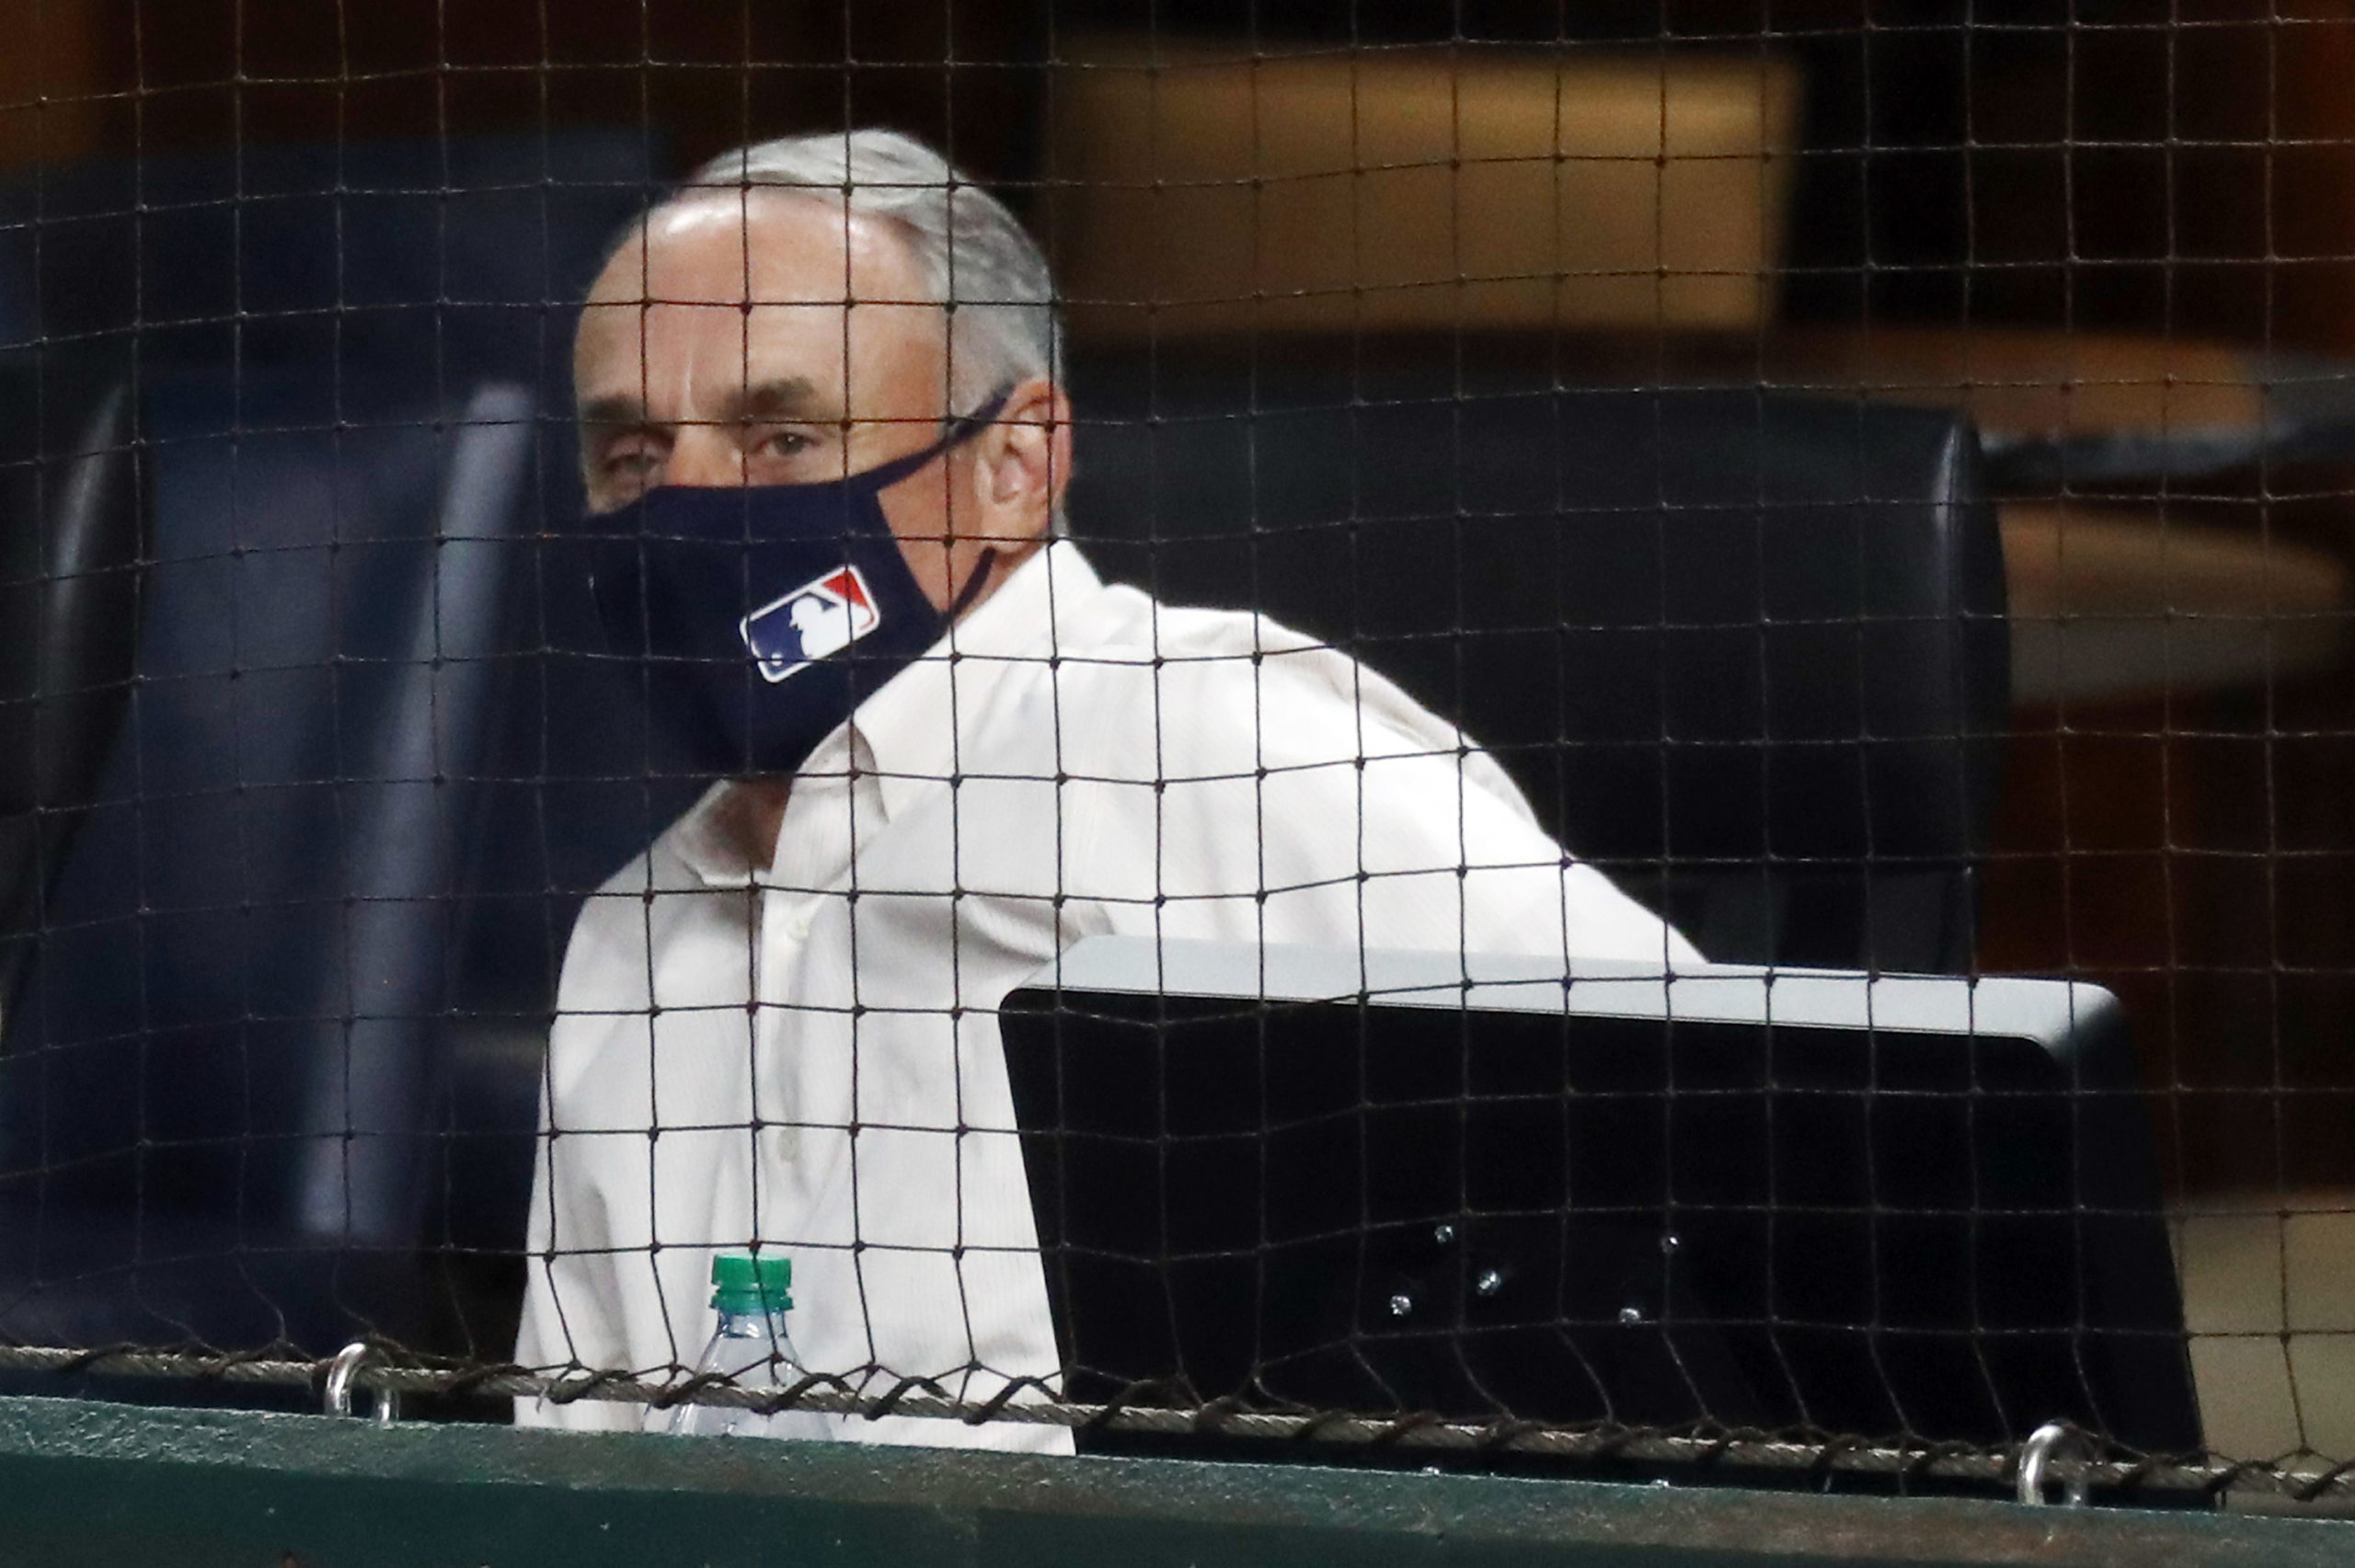 MLB Commissioner Rob Manfred attends a game at Globe Life Field on Oct. 7 in Arlington, Texas. (Ronald Martinez/Getty Images)